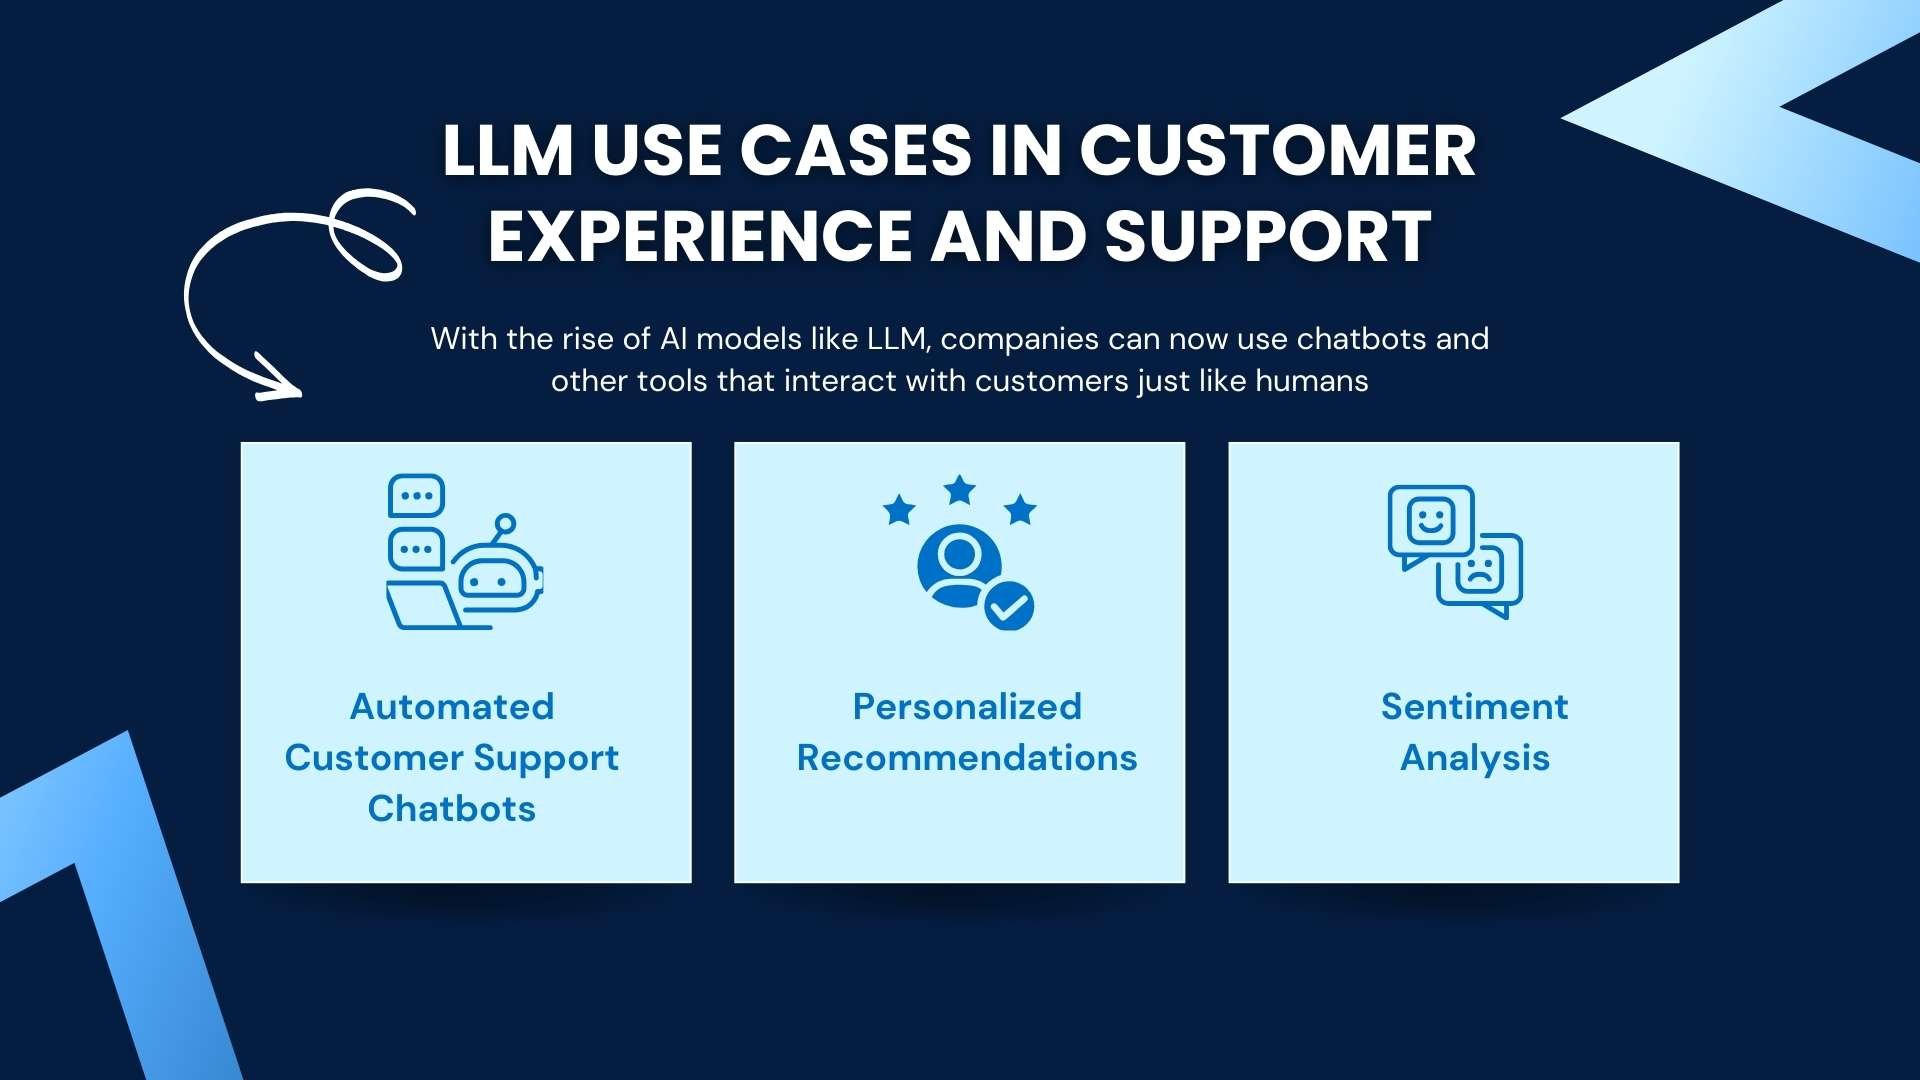 LLM Use Cases in Customer Experience and Support